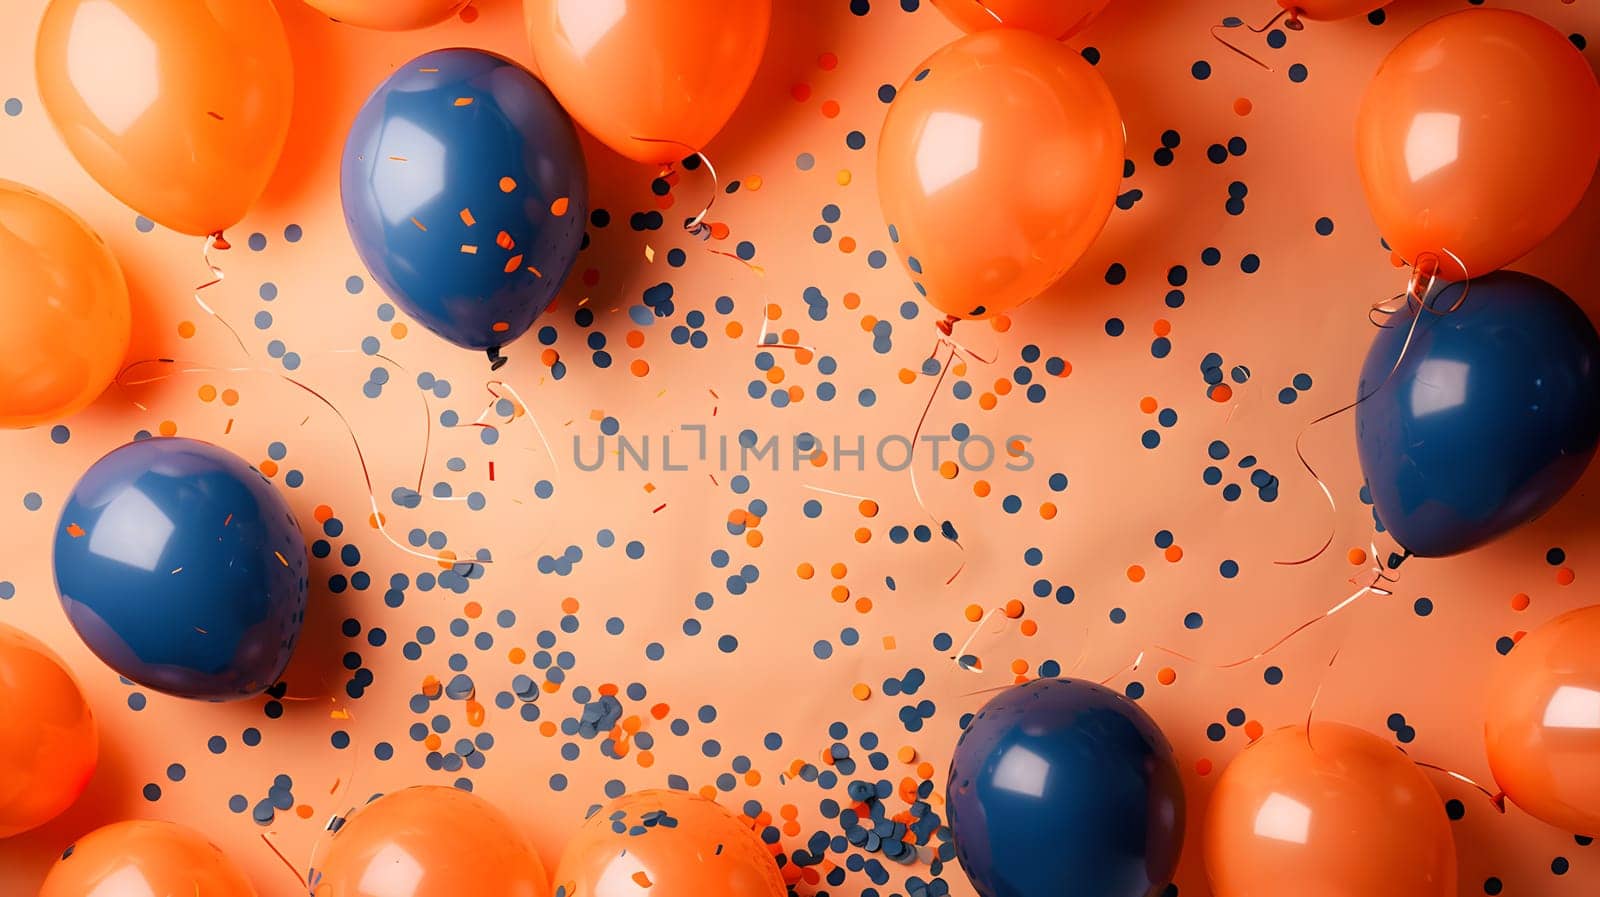 An assortment of circular amber, orange, and electric blue balloons alongside blue confetti creates a vibrant and festive display on the table